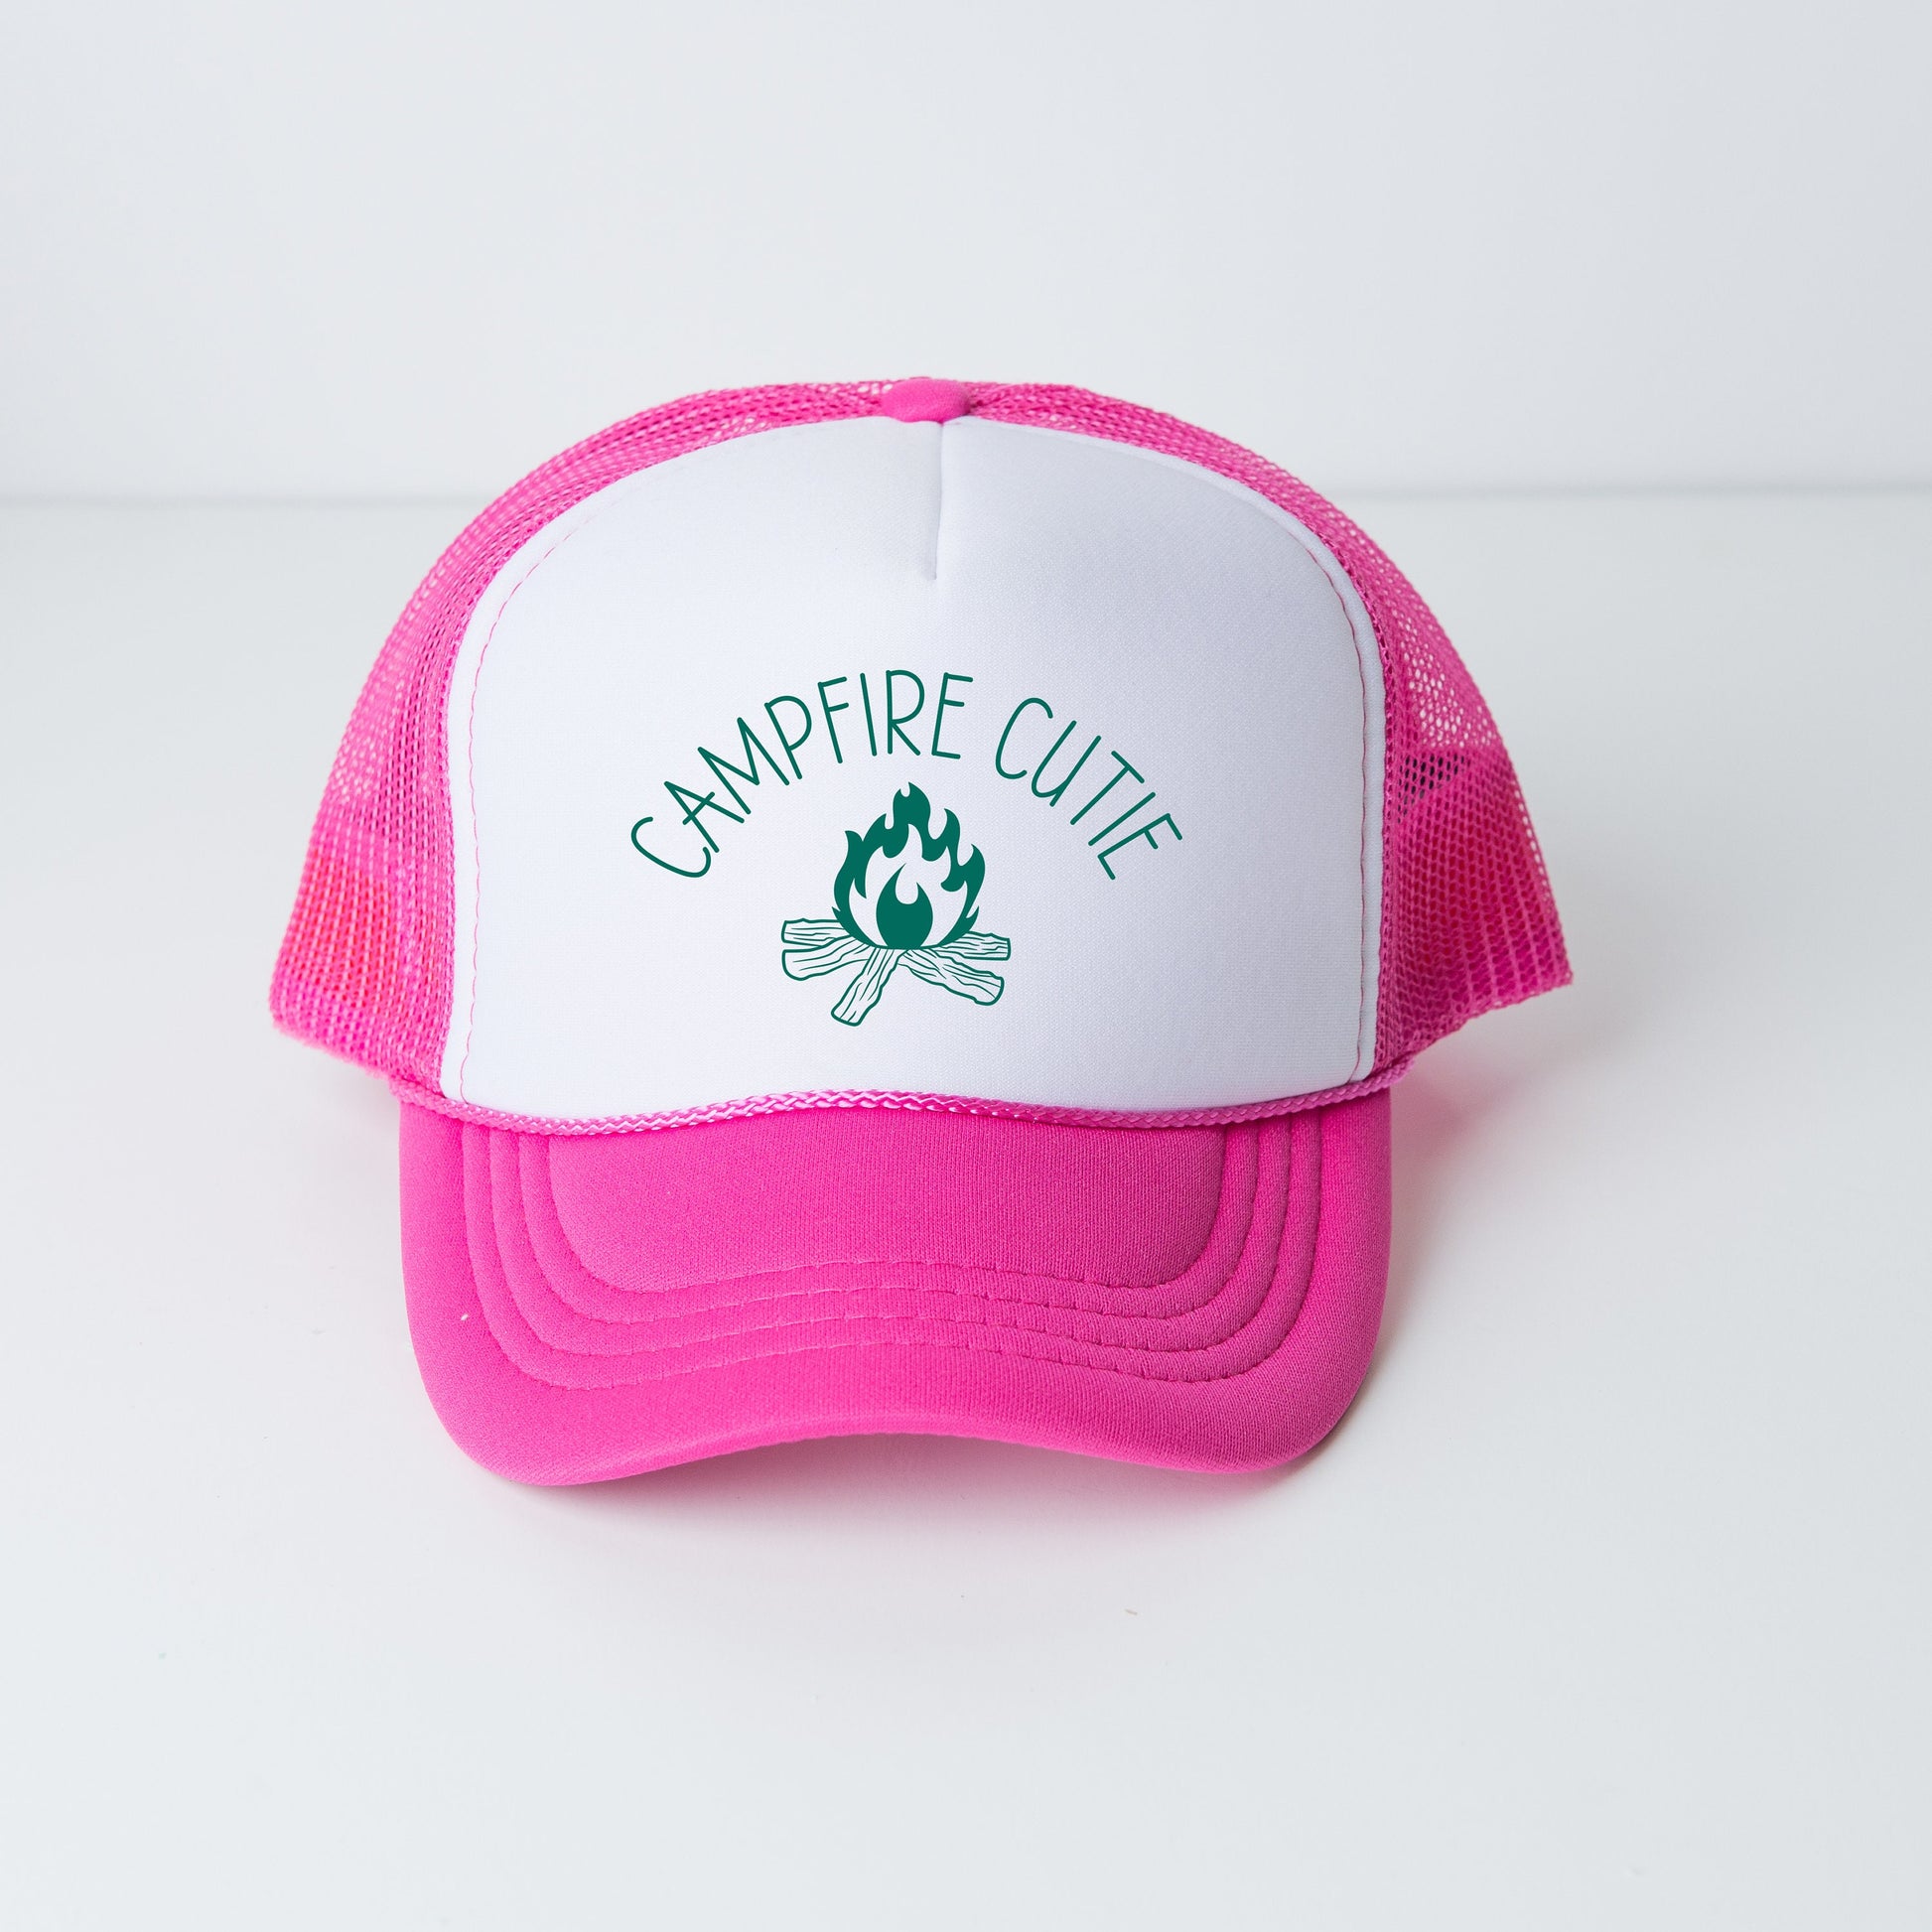 a pink and white trucker hat with a campfire logo